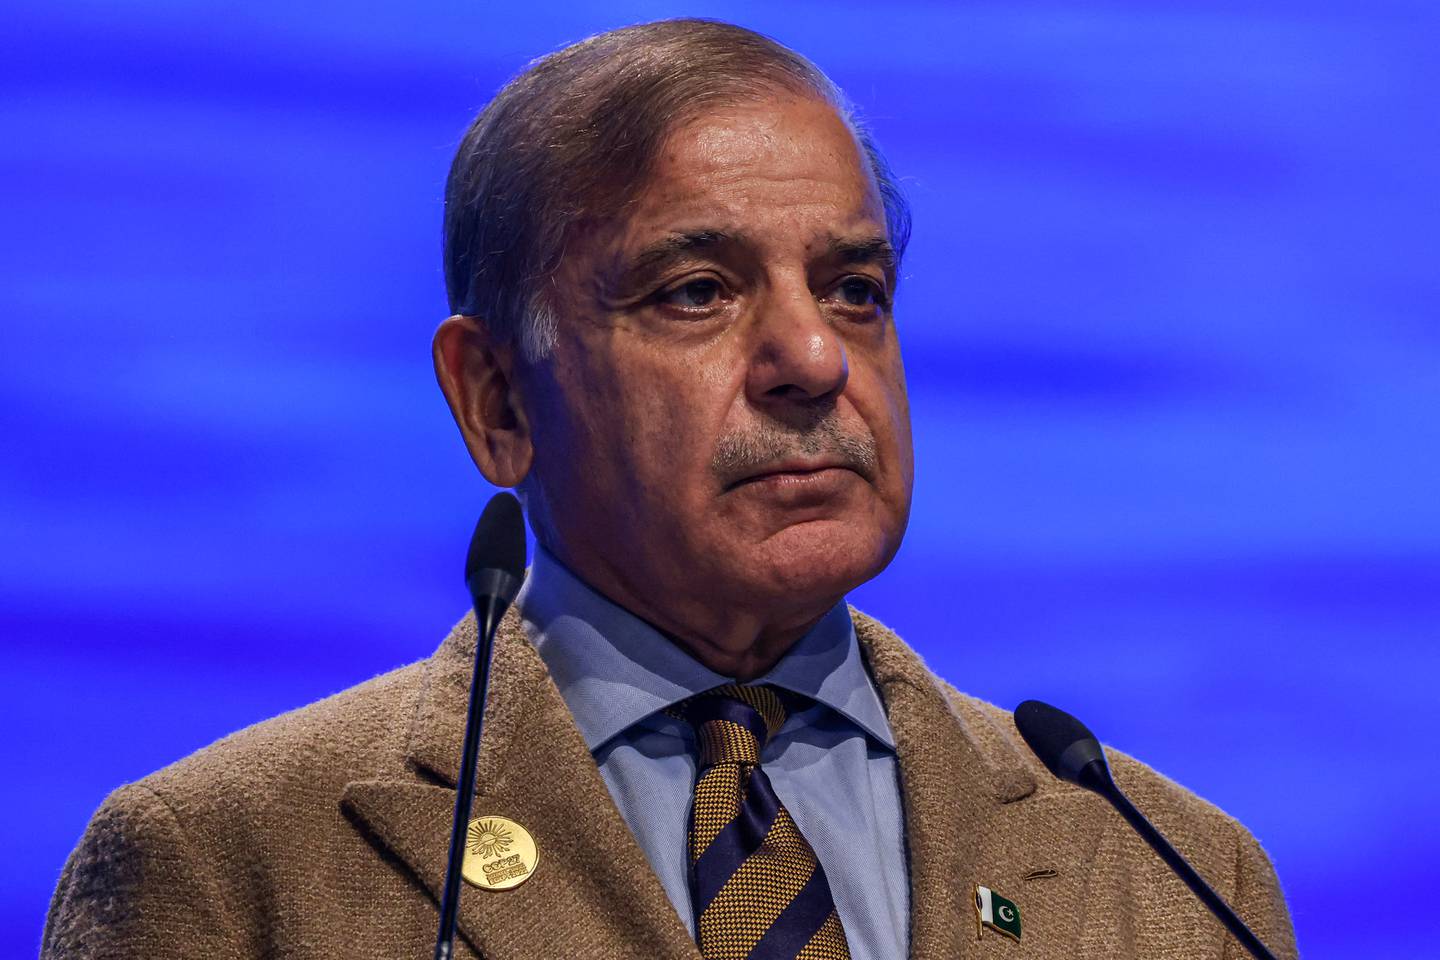 F'or KOS Climate piece: Following devastating floods which left a third of his country under water Pakistan prime minister Shehbaz Sharif rang the loudest alarm bell: “What happened in Pakistan will not stay in Pakistan.”